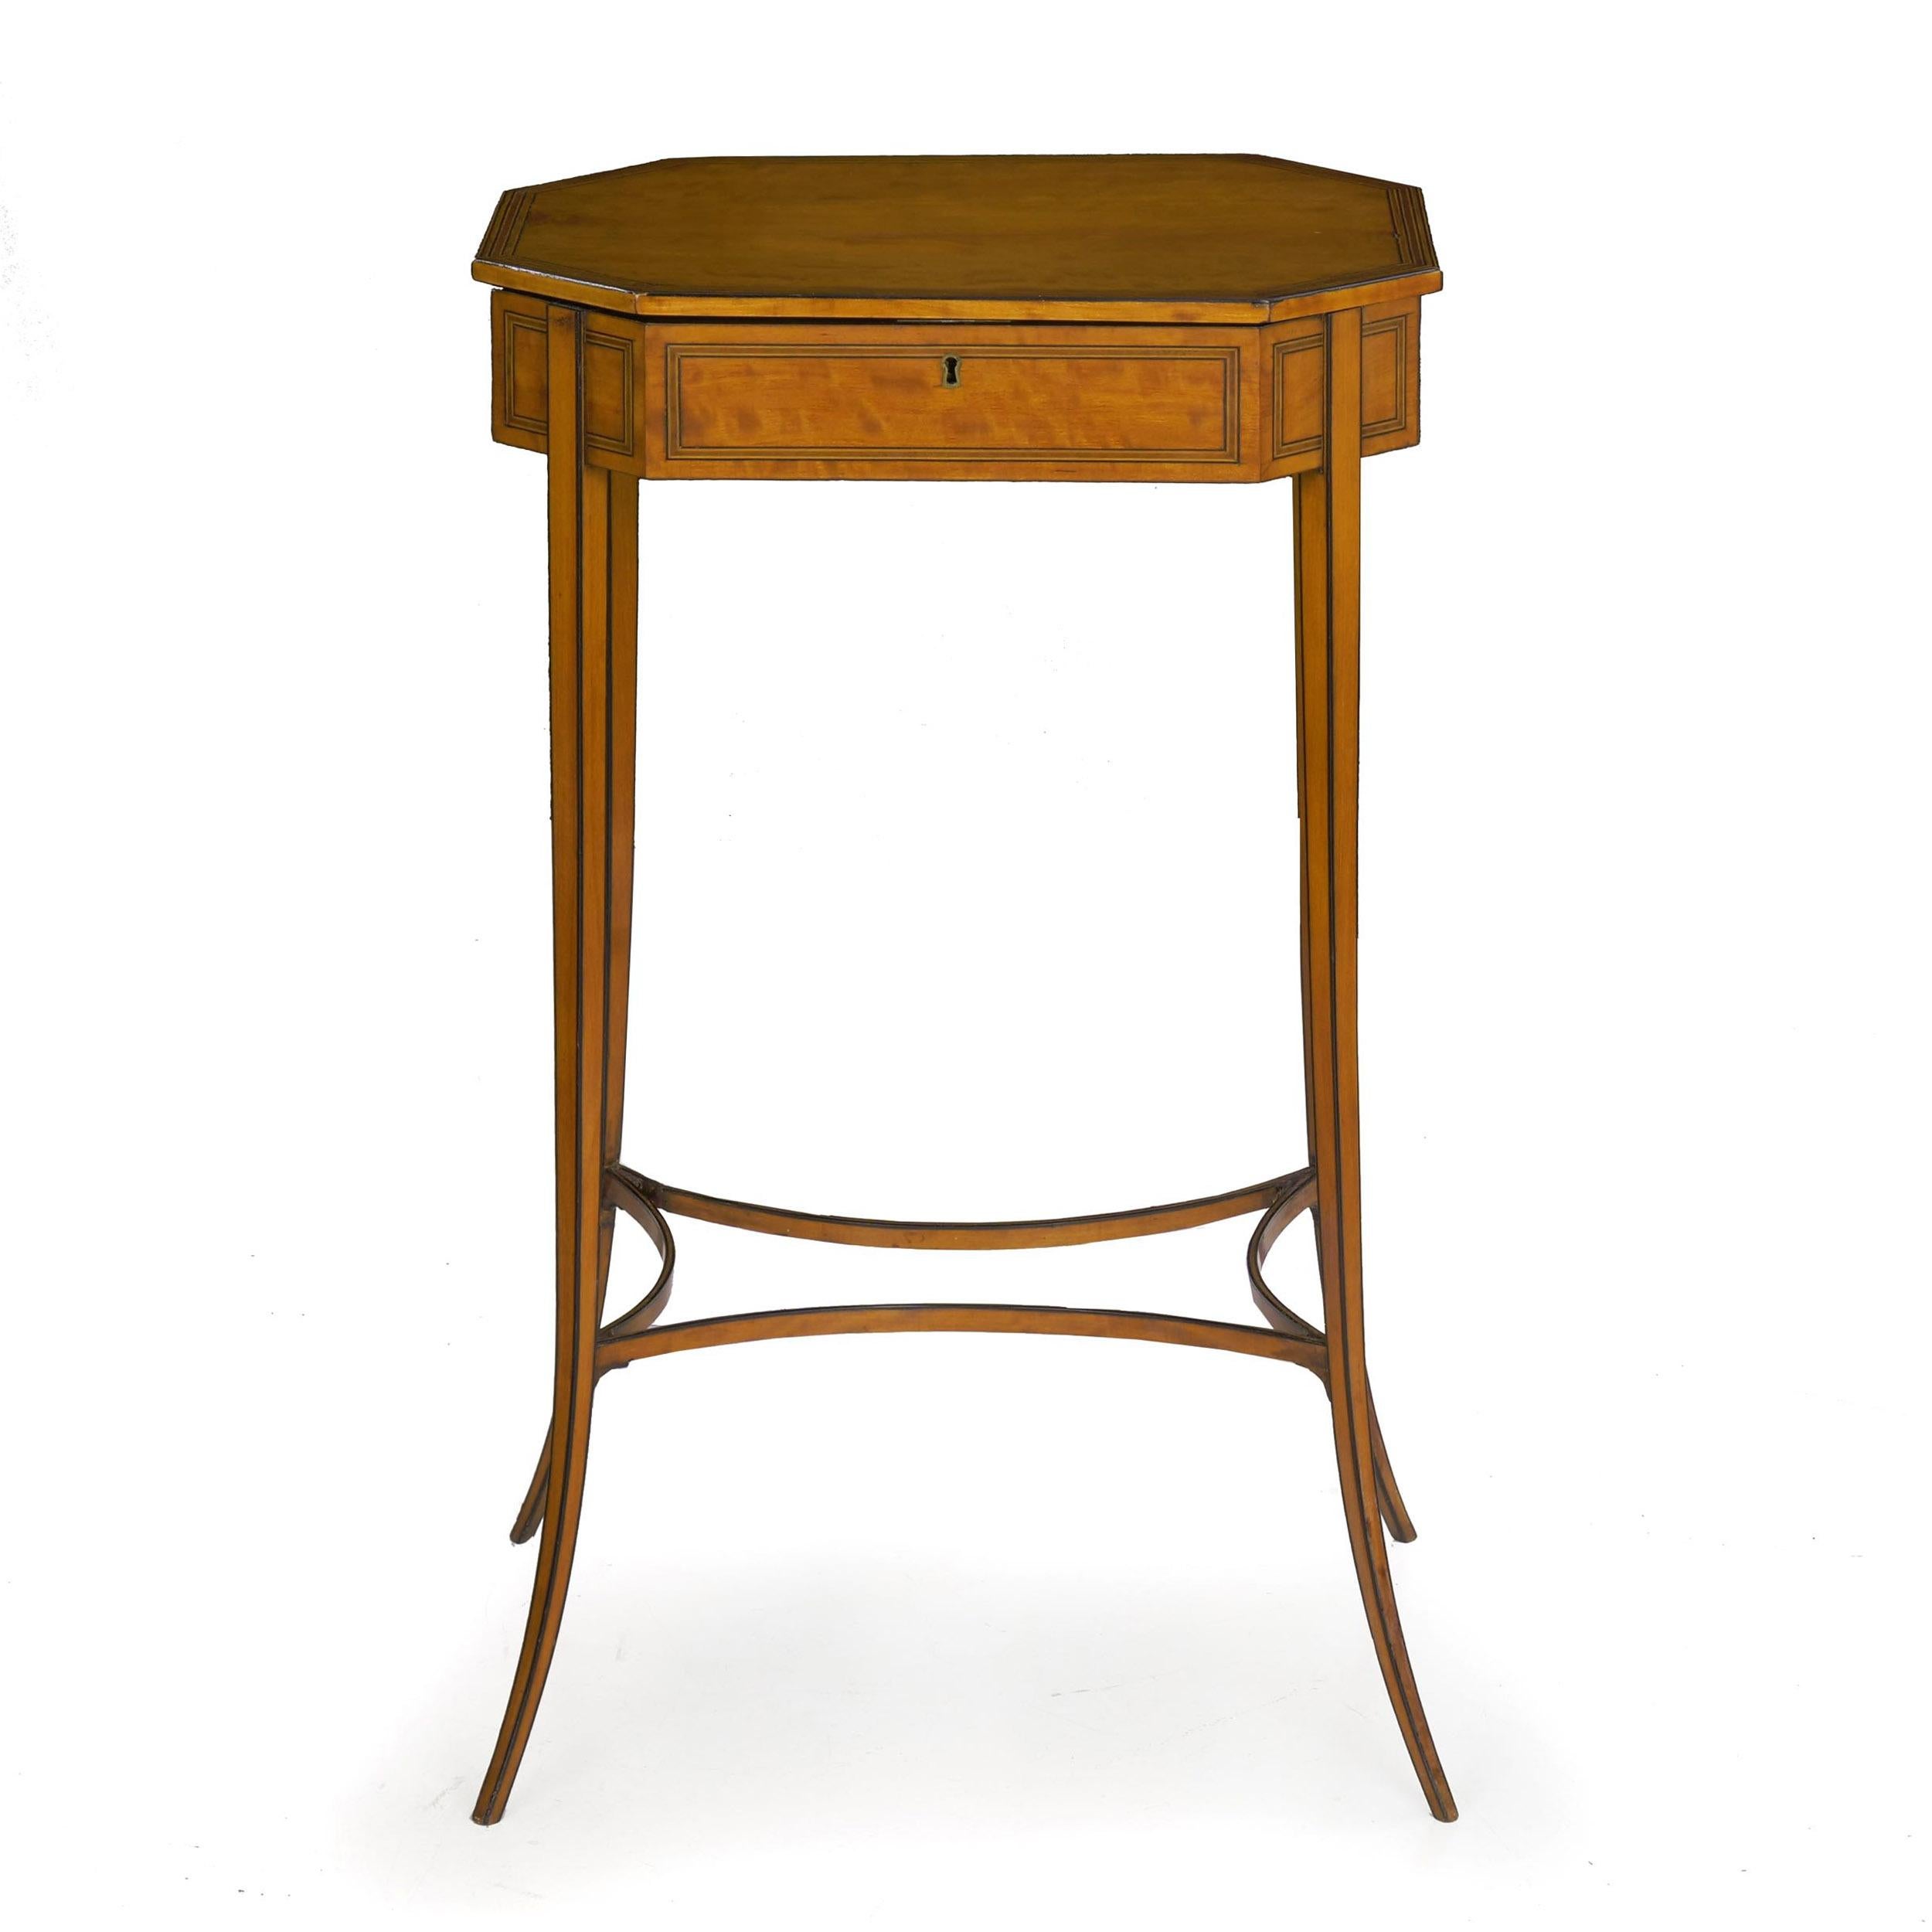 An exquisite form of very fine craftsmanship, this gorgeous accent table has an octagonal body with a lid lifting on original hinges to access a tidy fitted interior. A fine piece of golden satinwood is framed with multiple borders of stringer